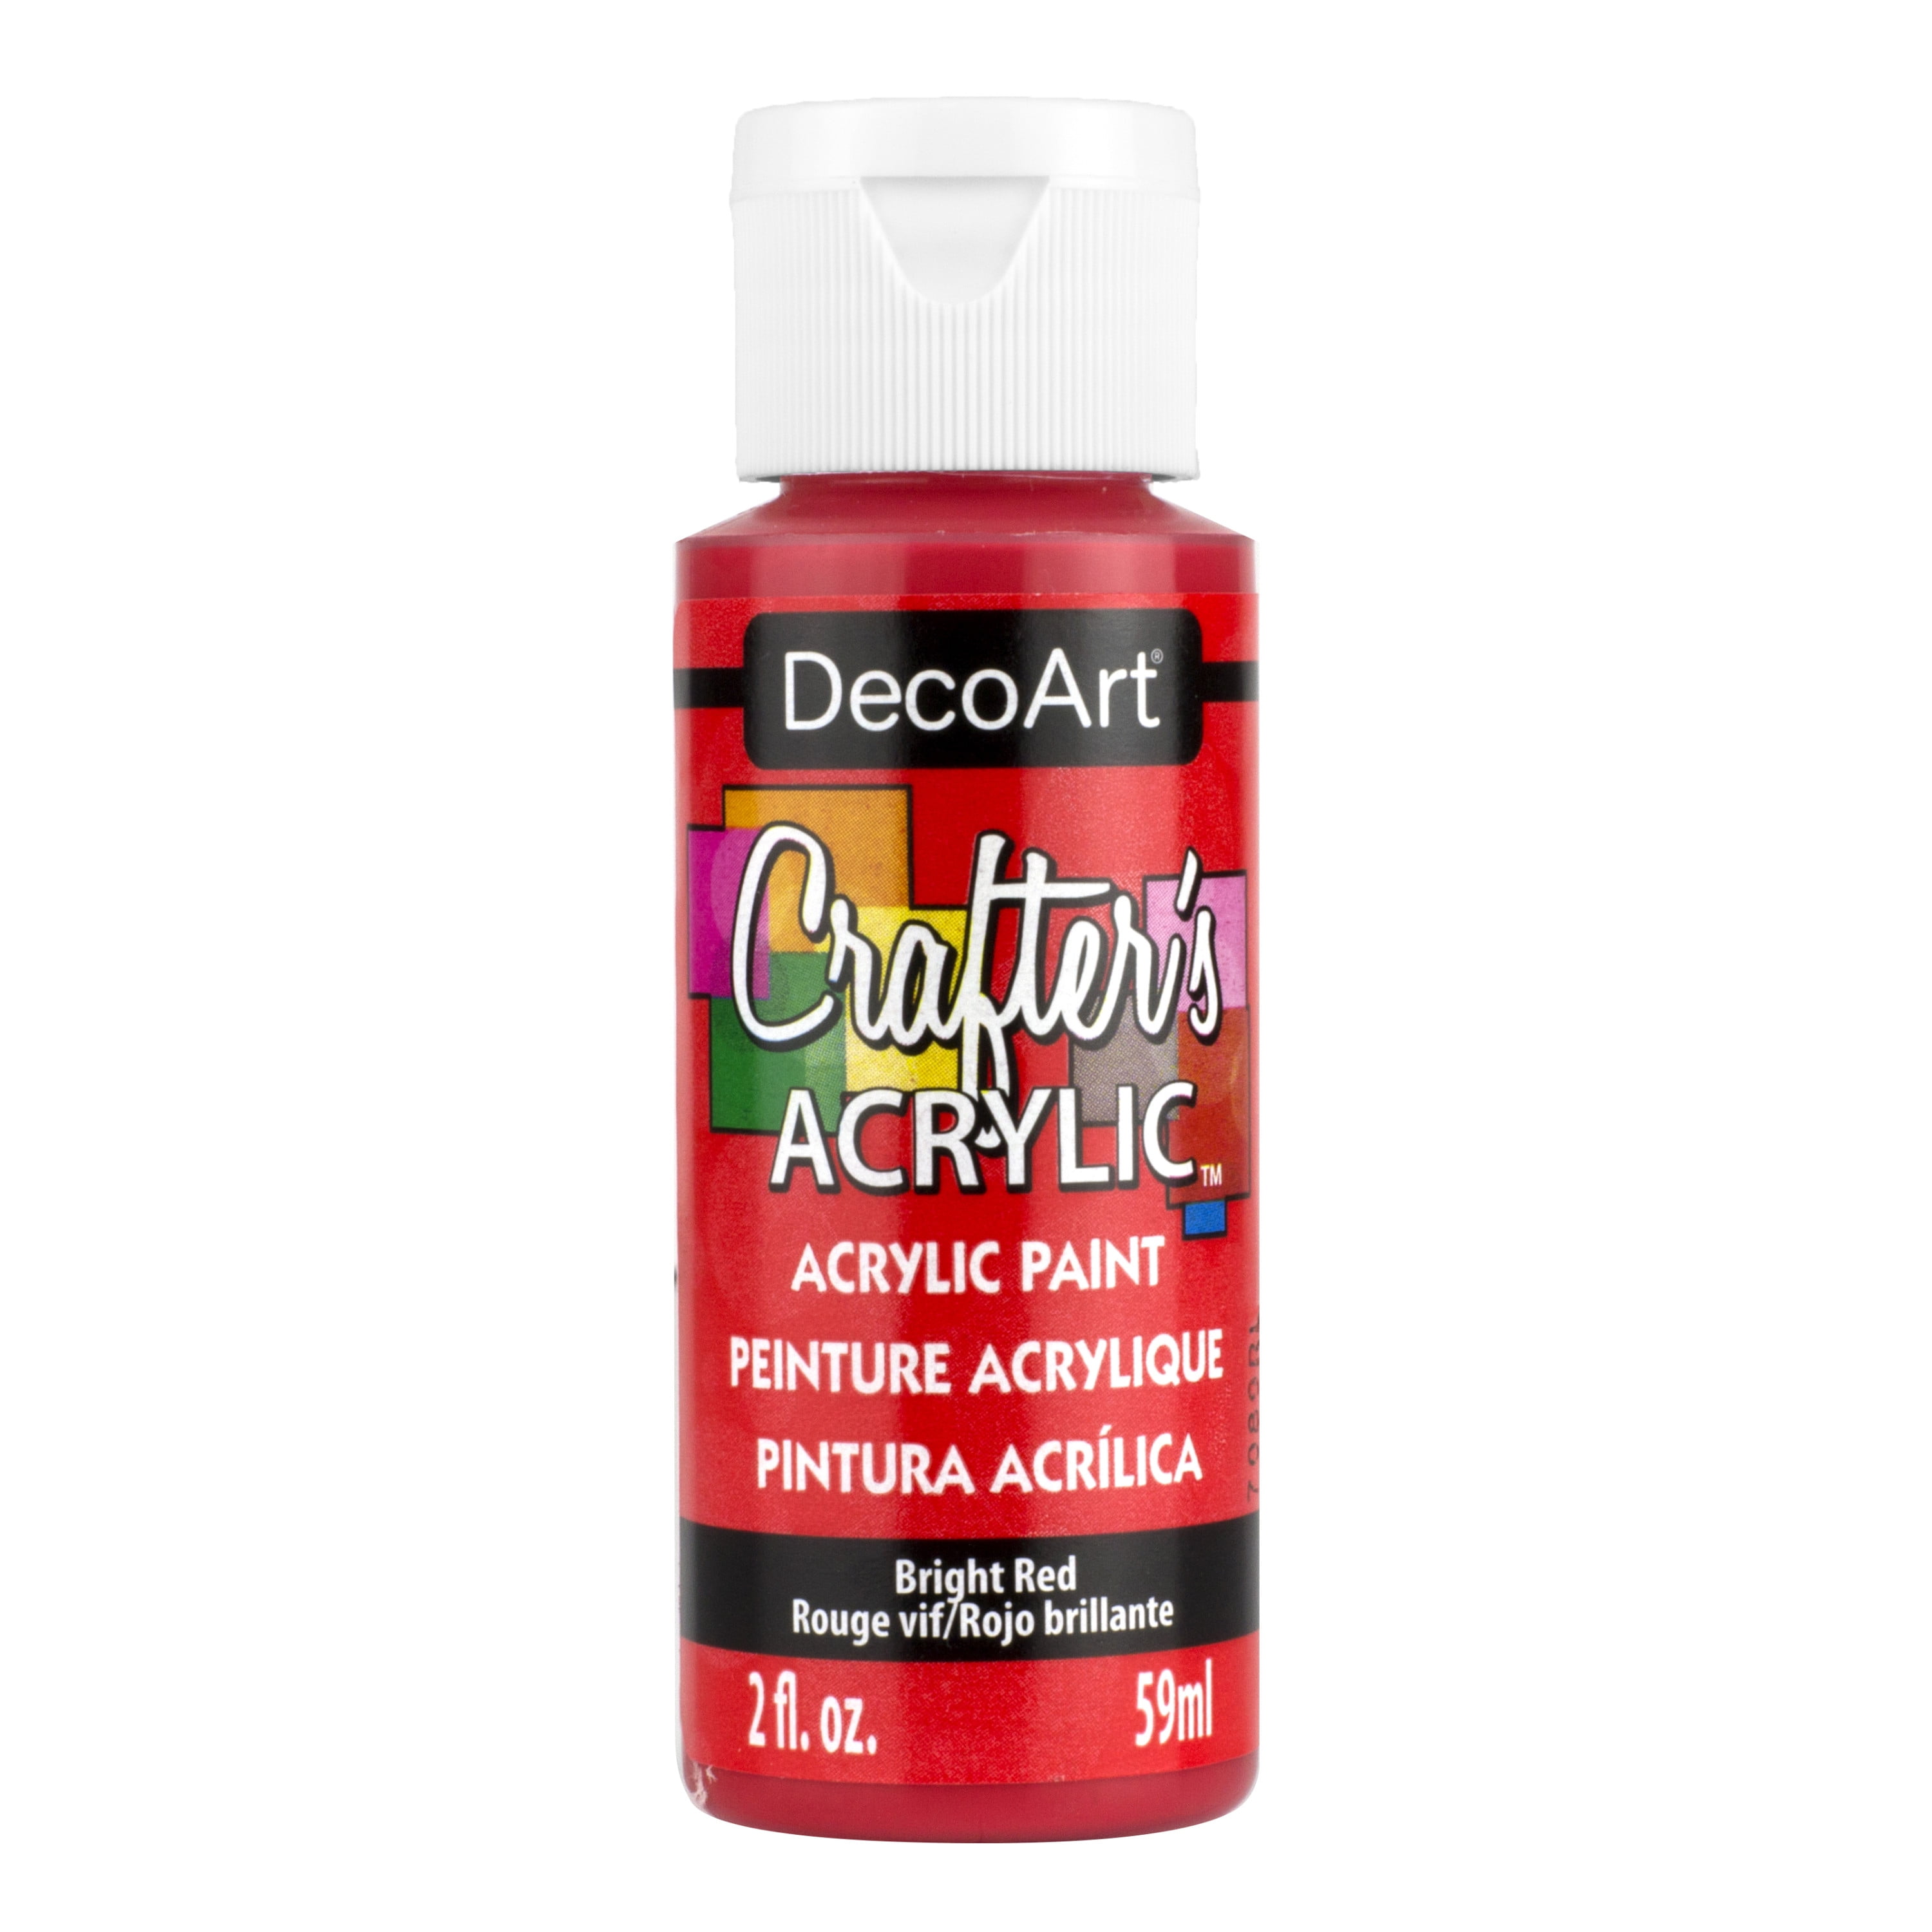 Decoart Crafter's Acrylic Paint 2oz - Bright Red